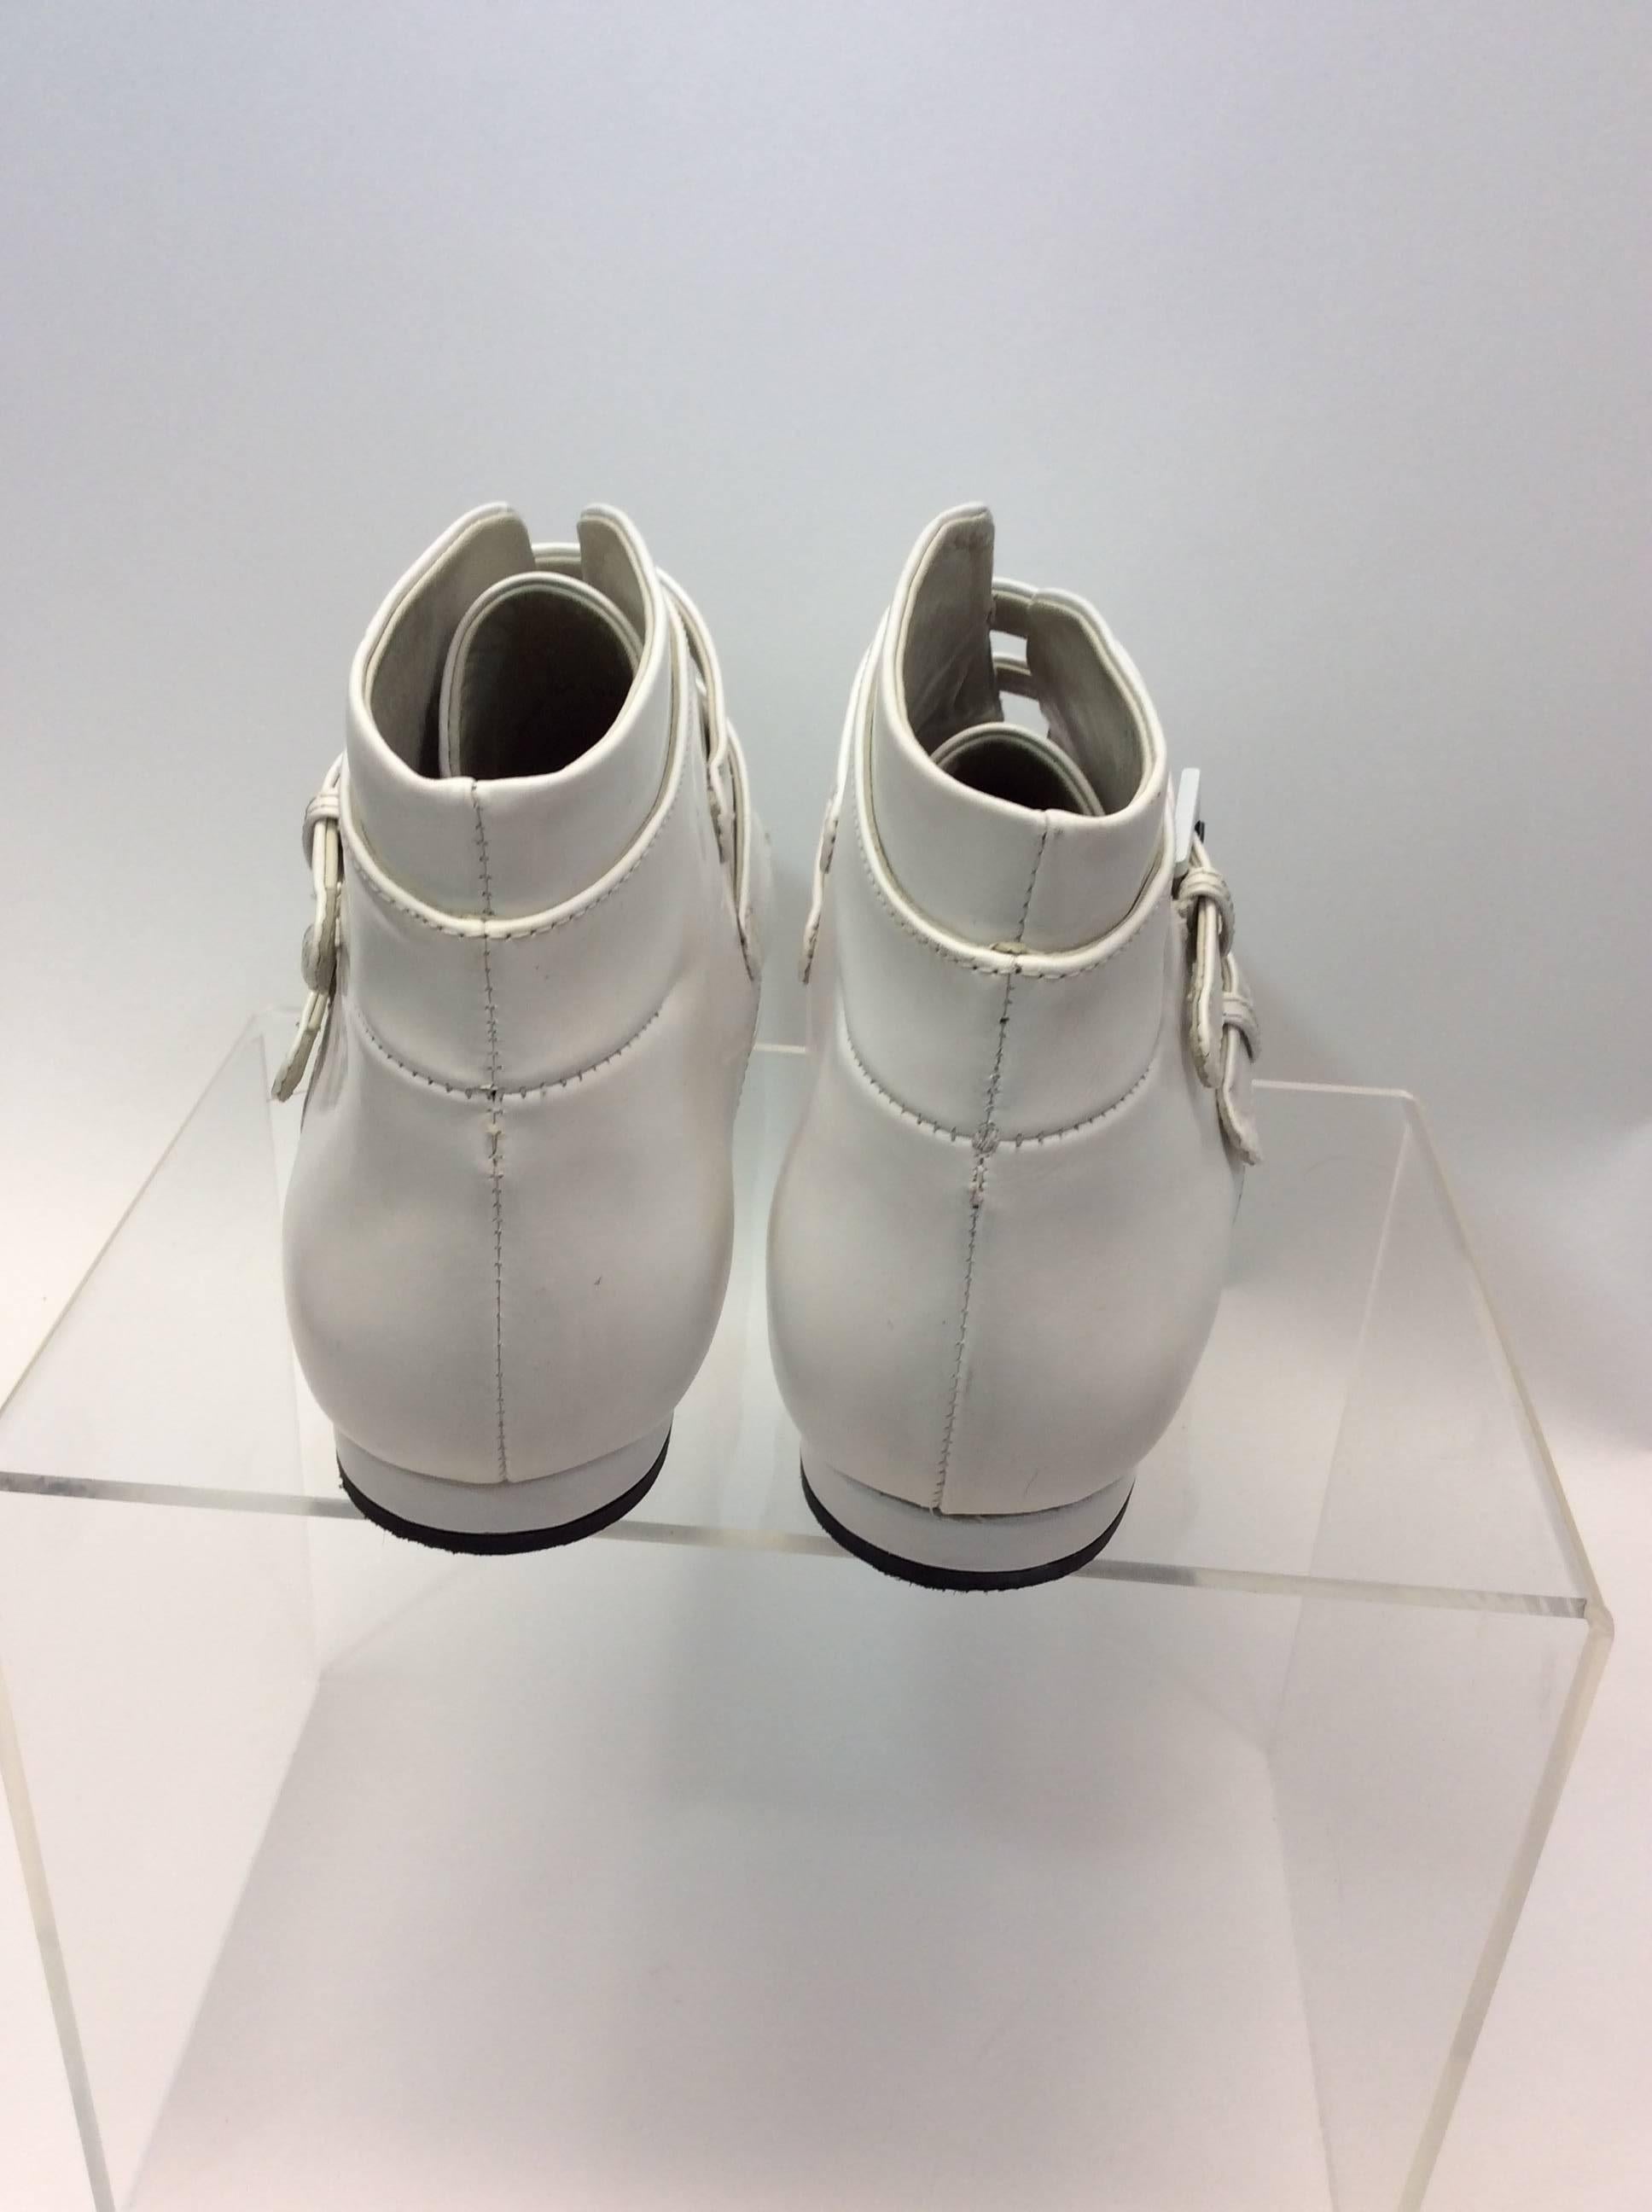 Jil Sander White Ankle Boots  In Good Condition For Sale In Narberth, PA